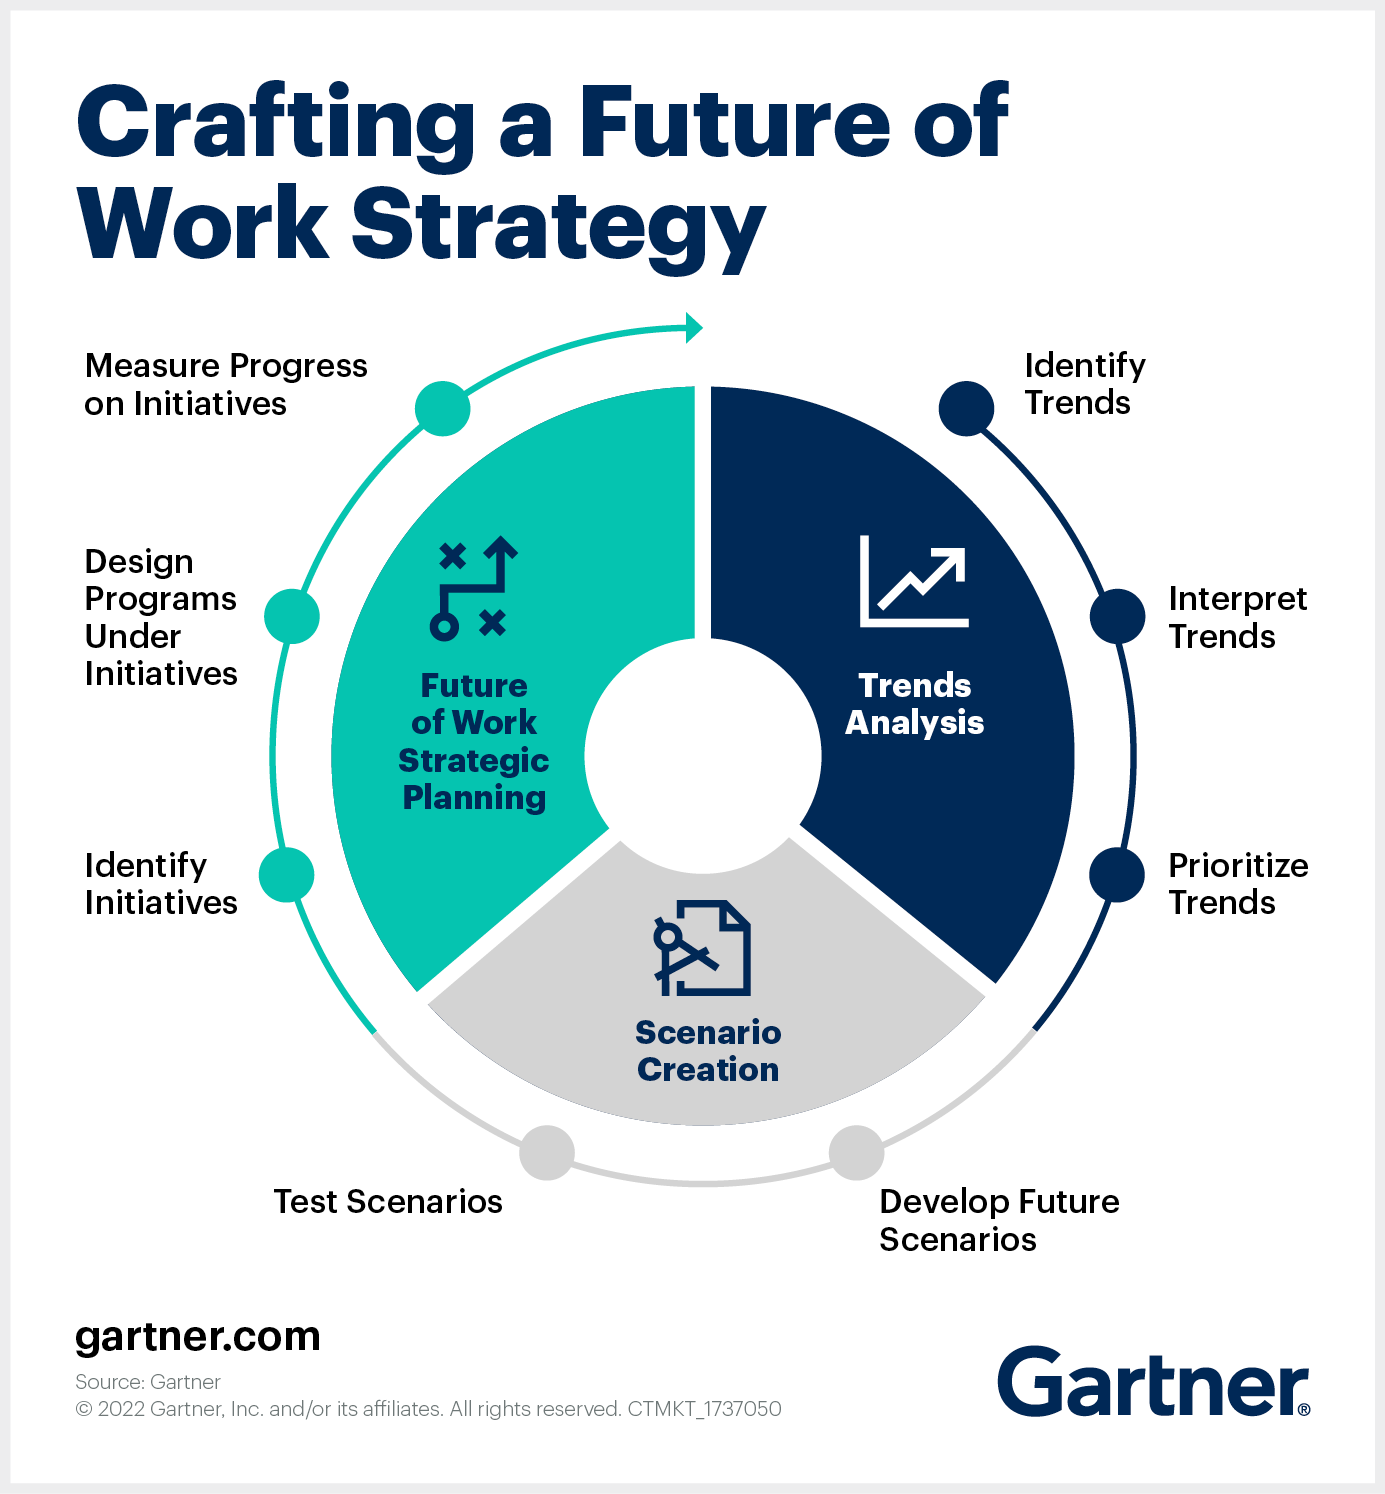 Craft a Future of Work Strategy for Your Organization